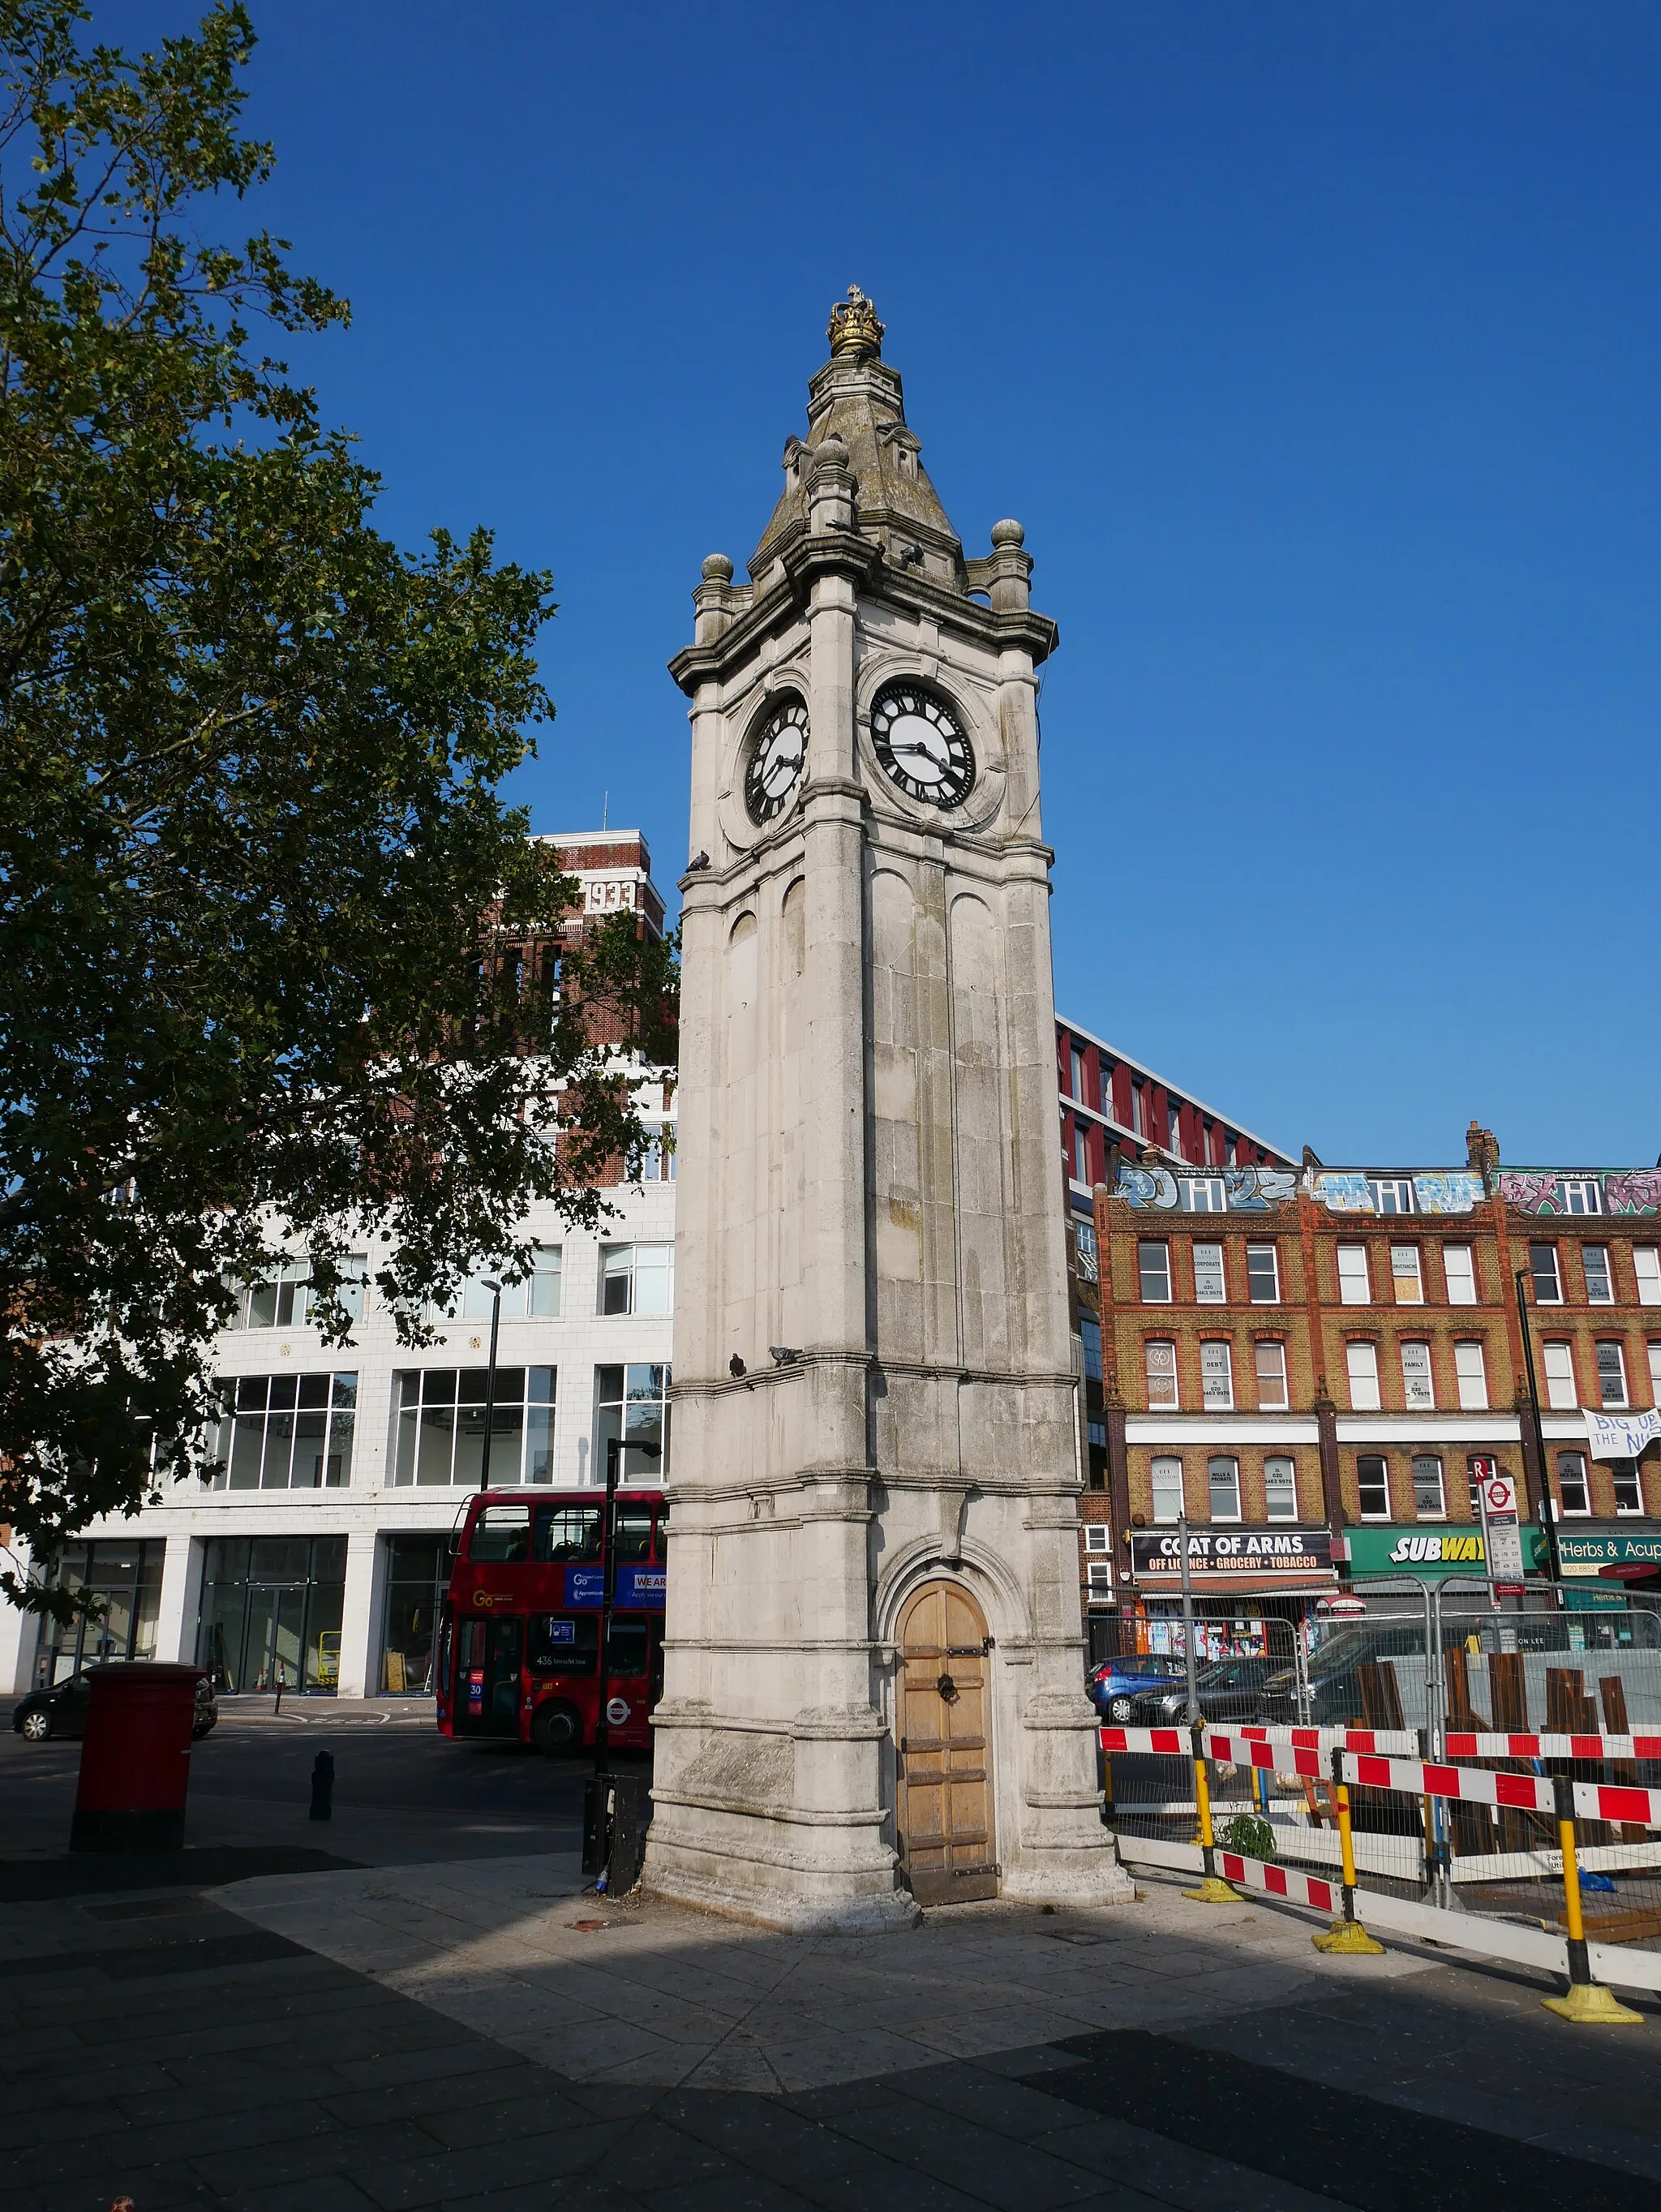 Photo showing: The clock tower in Lewisham as seen from the south.